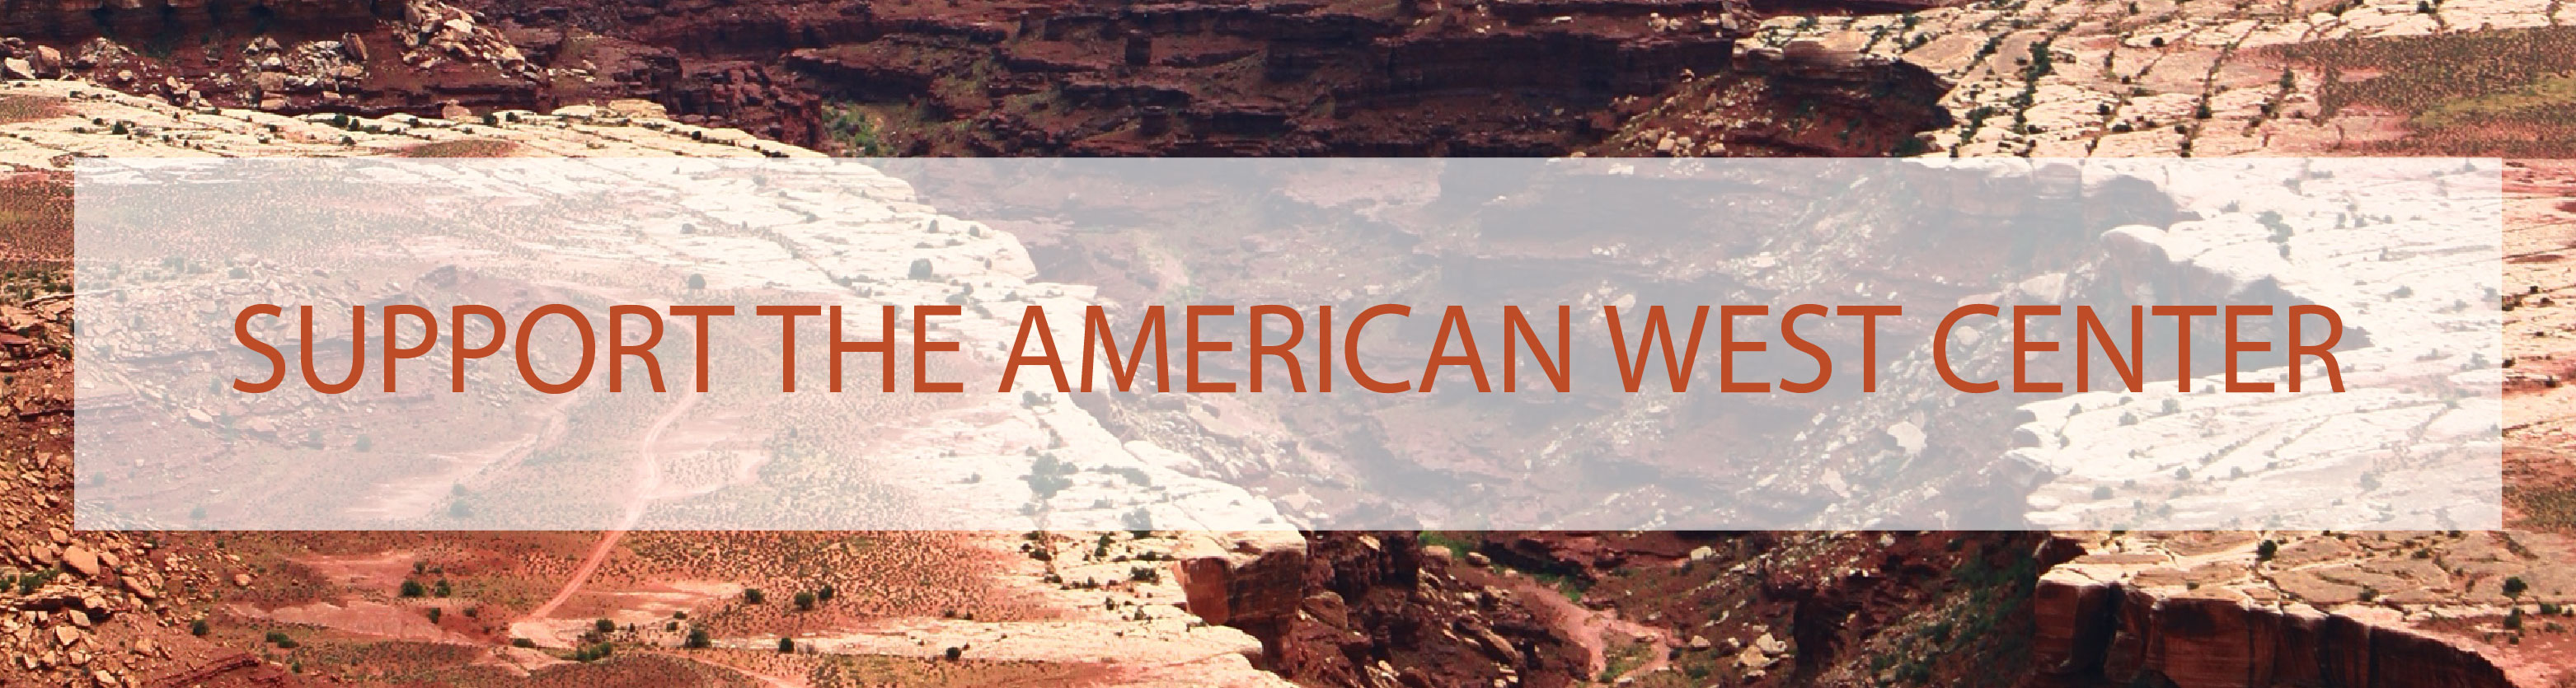 Support the American West Center